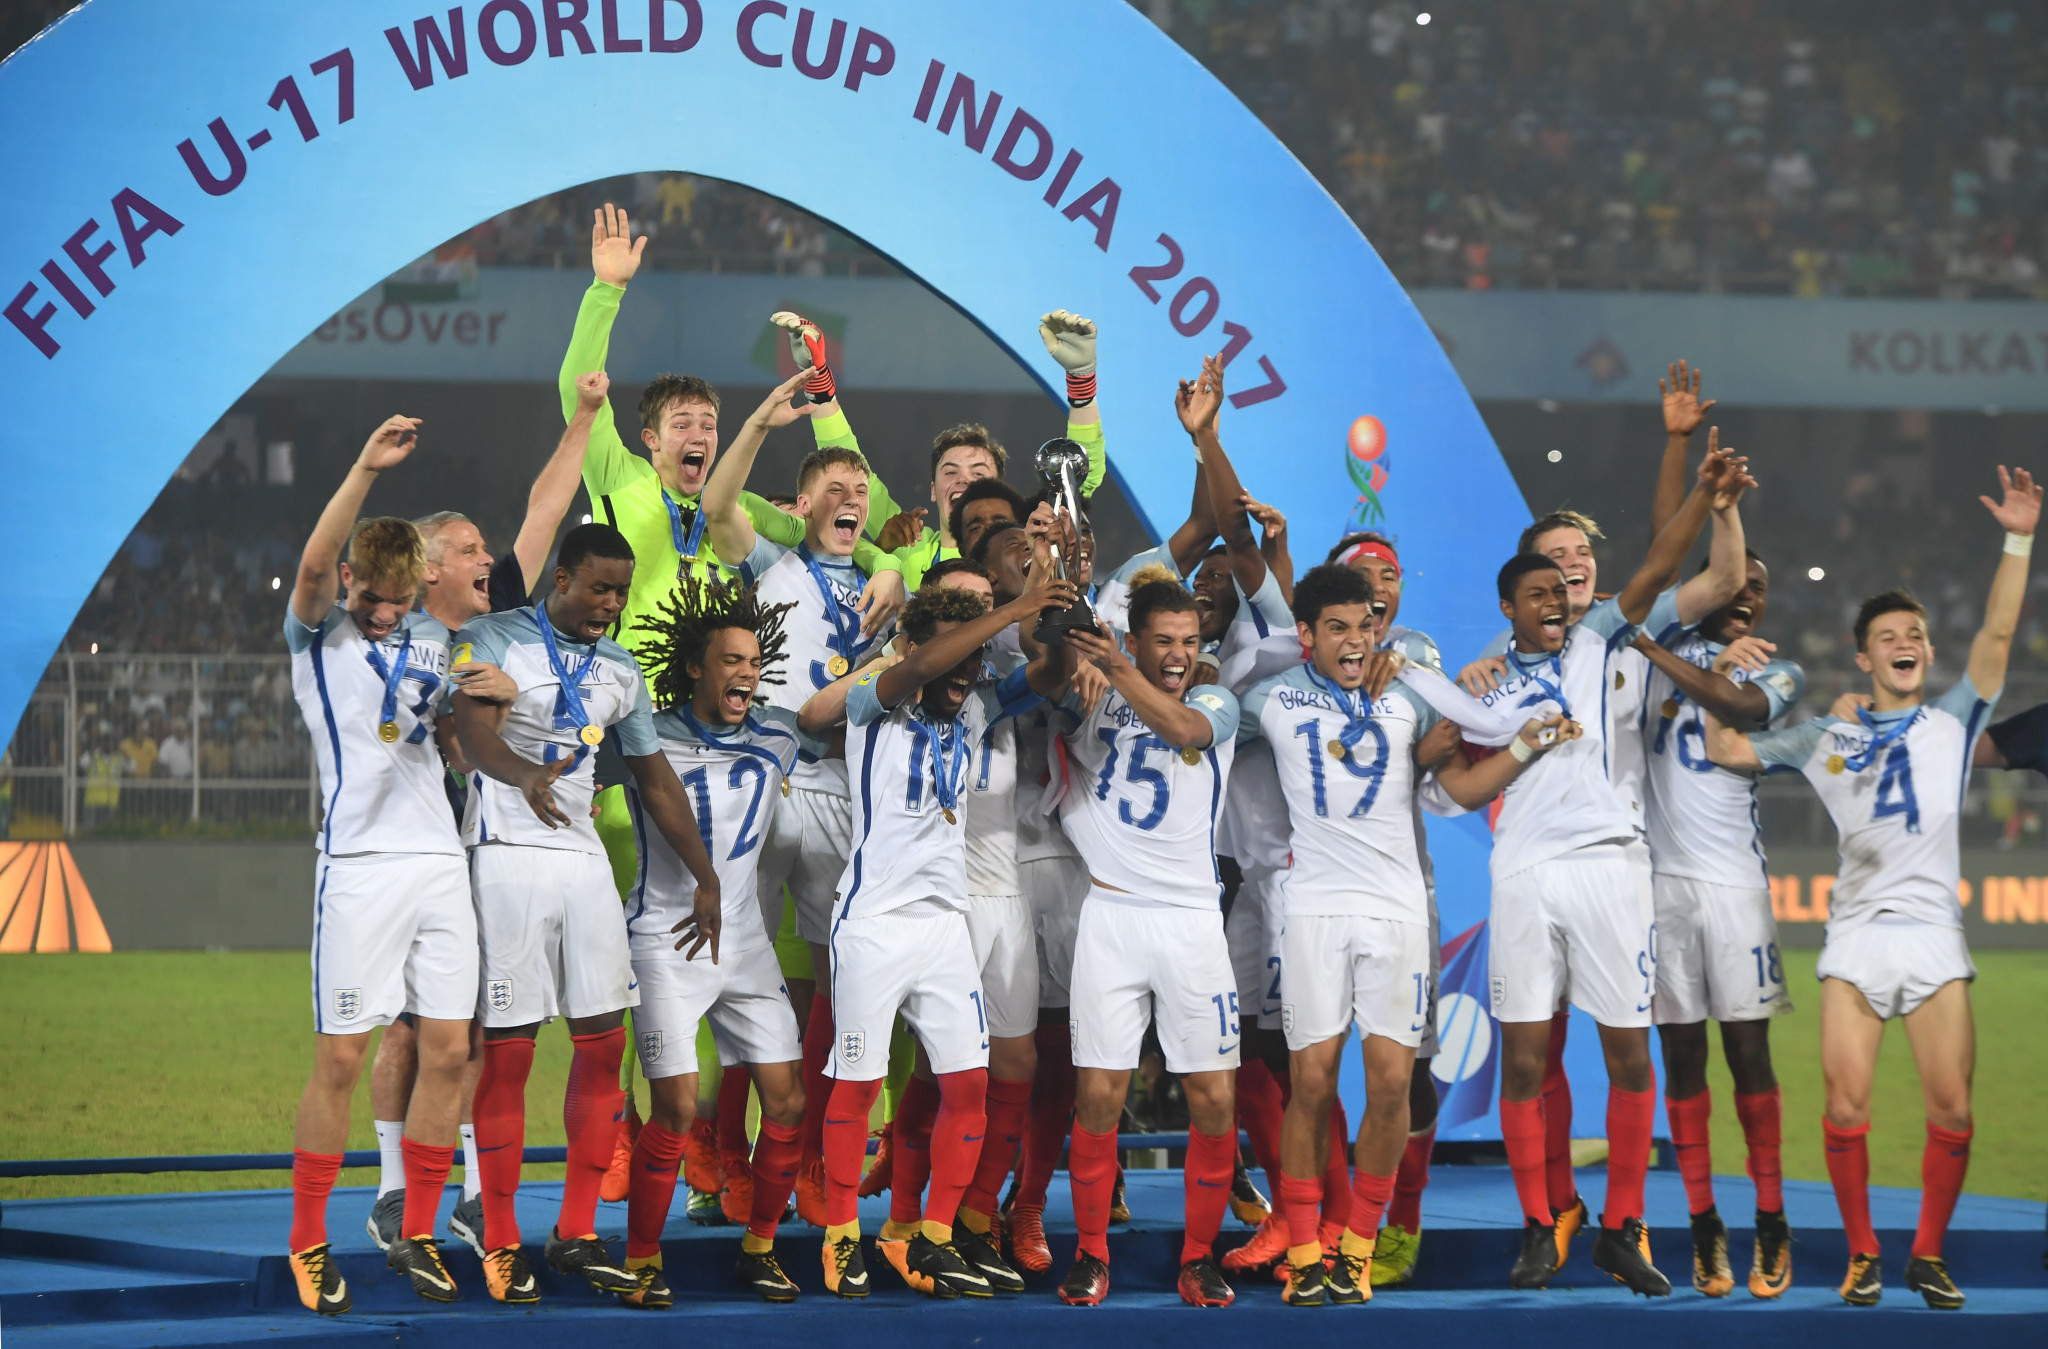 England produced a sensational comeback to thrash Spain 5-2 and claim their first-ever FIFA Under-17 World Cup title in Kolkata in India ©Getty Images